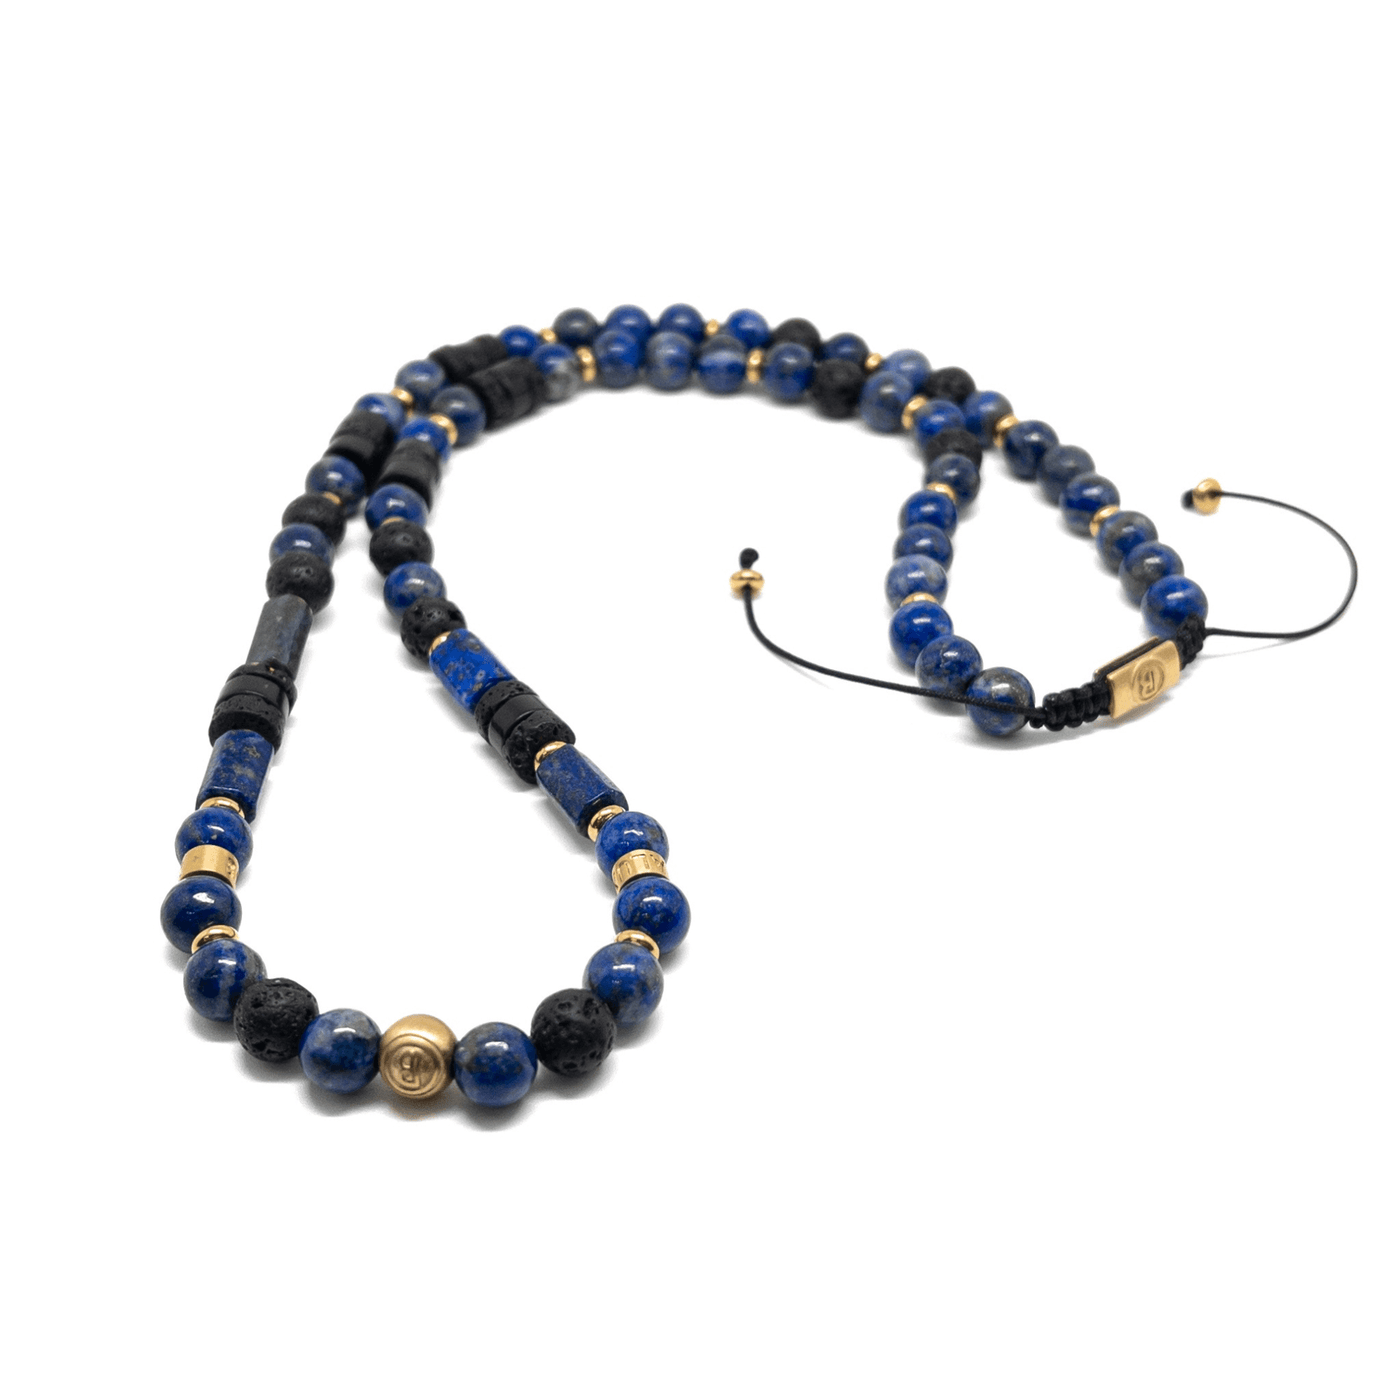 The Lapis Lazuli and Volcanic Stones Necklace